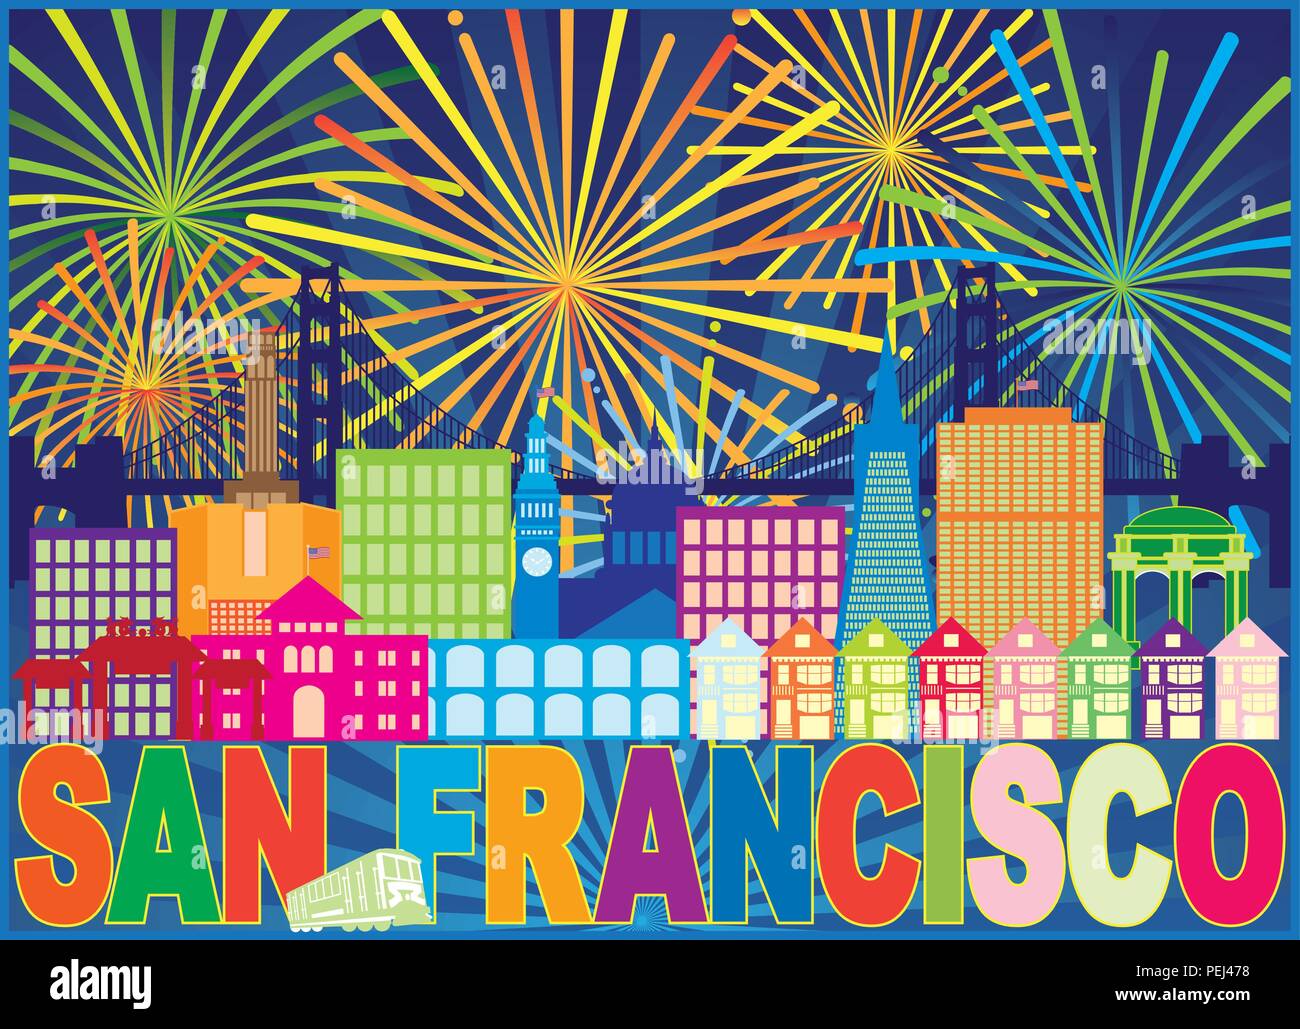 San Francisco California City Skyline with Trolley Sun Rays Text Fireworks display pattern color Illustration Stock Vector